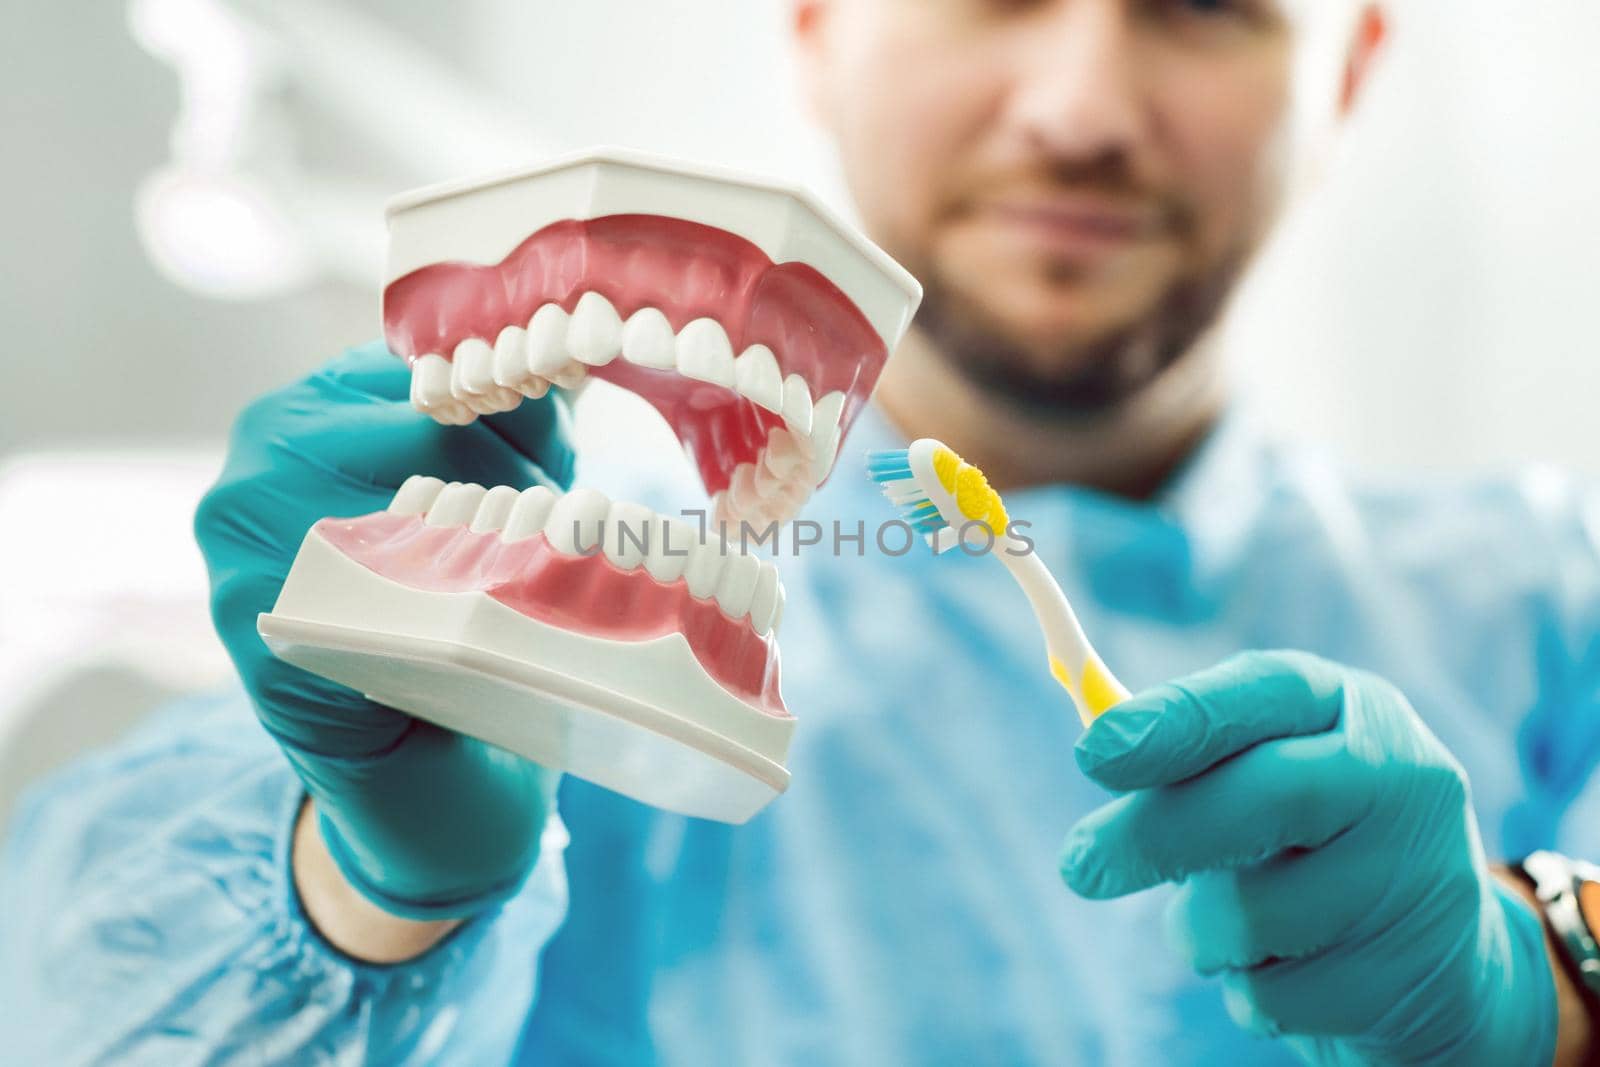 A model of a human jaw with teeth and a toothbrush in the dentist's hand by Lobachad